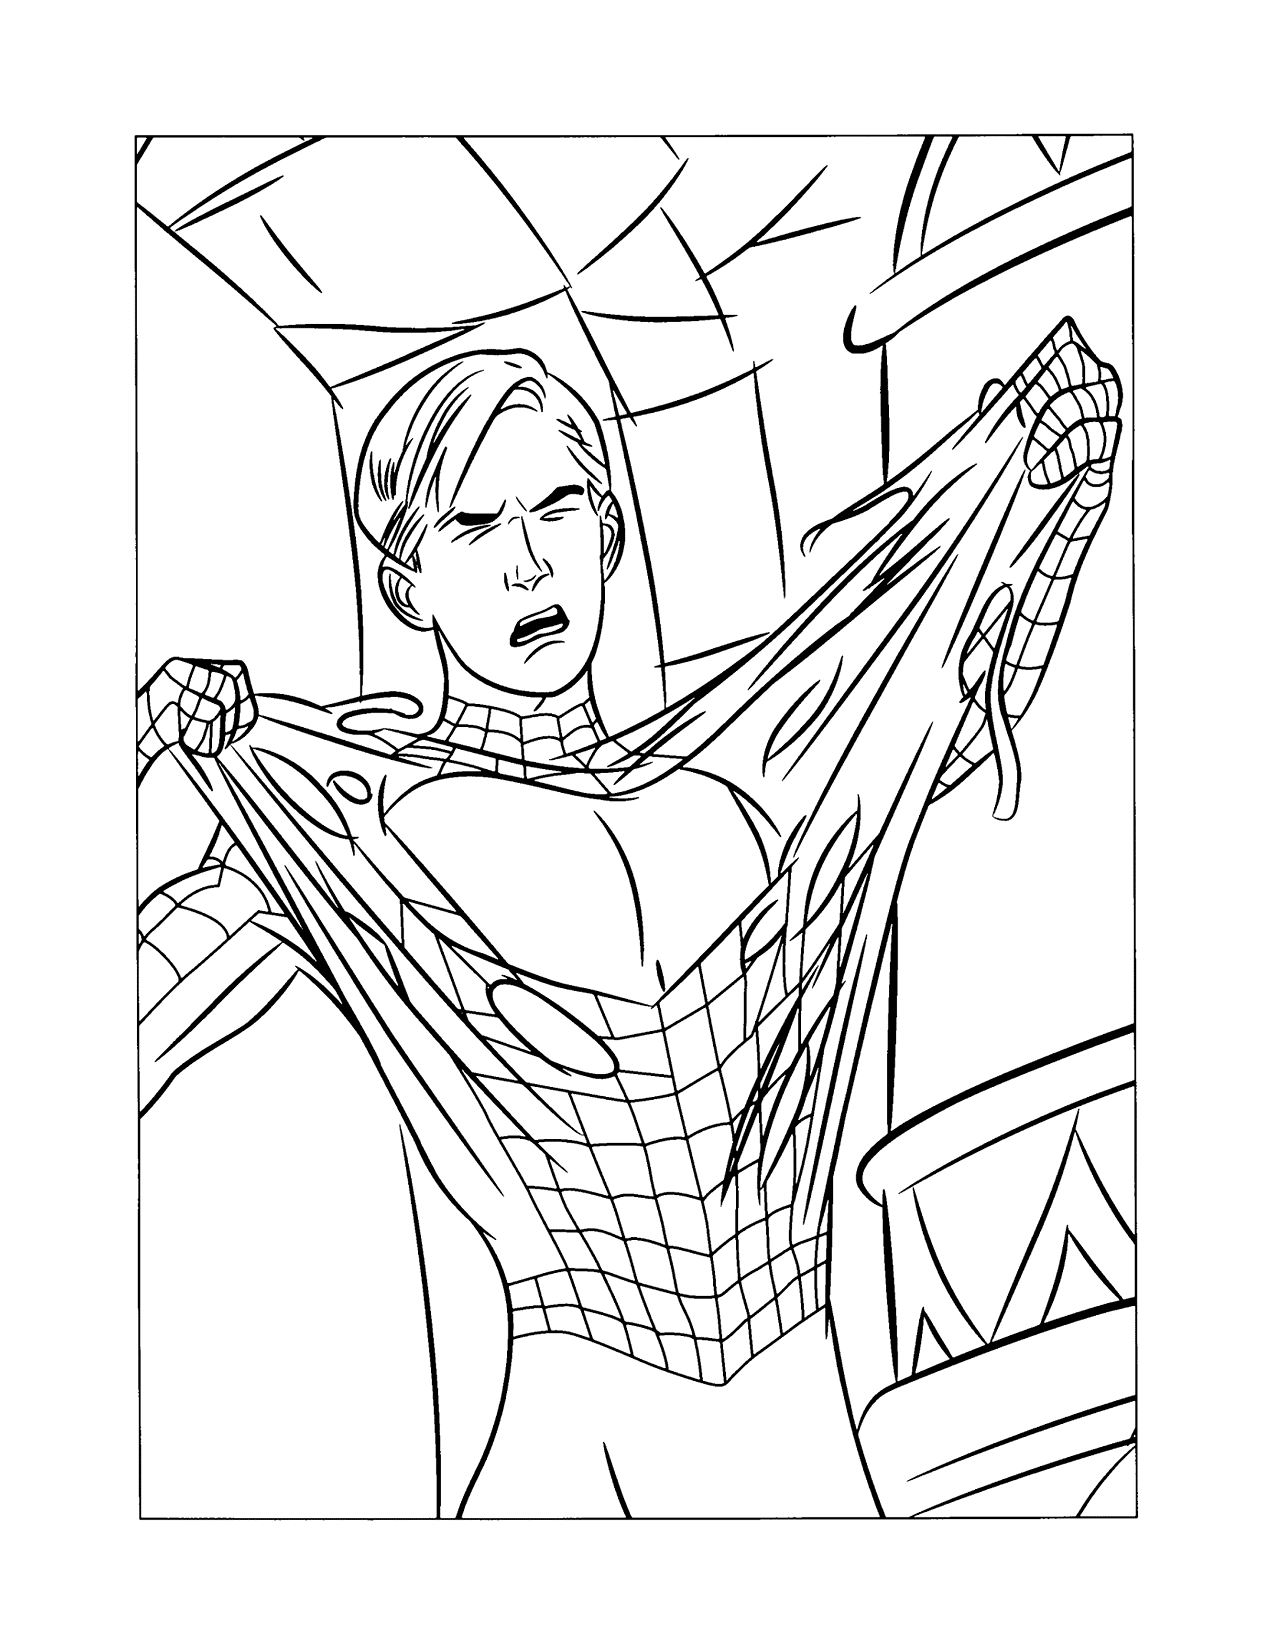 Peter Parker Tearing Spiderman Suit Coloring Page